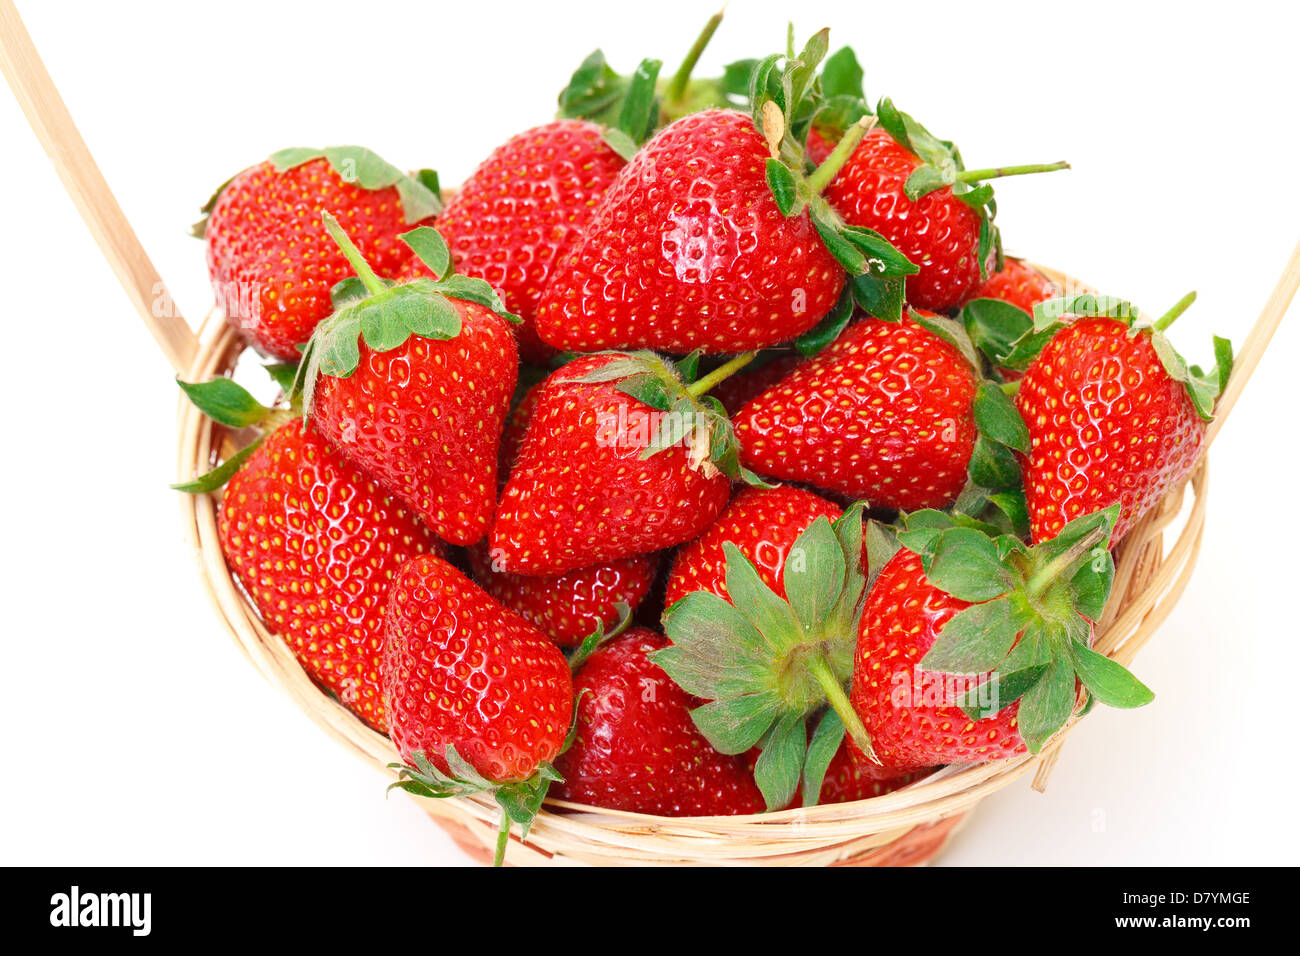 Ripe Red Strawberries in basket, on white background Stock Photo